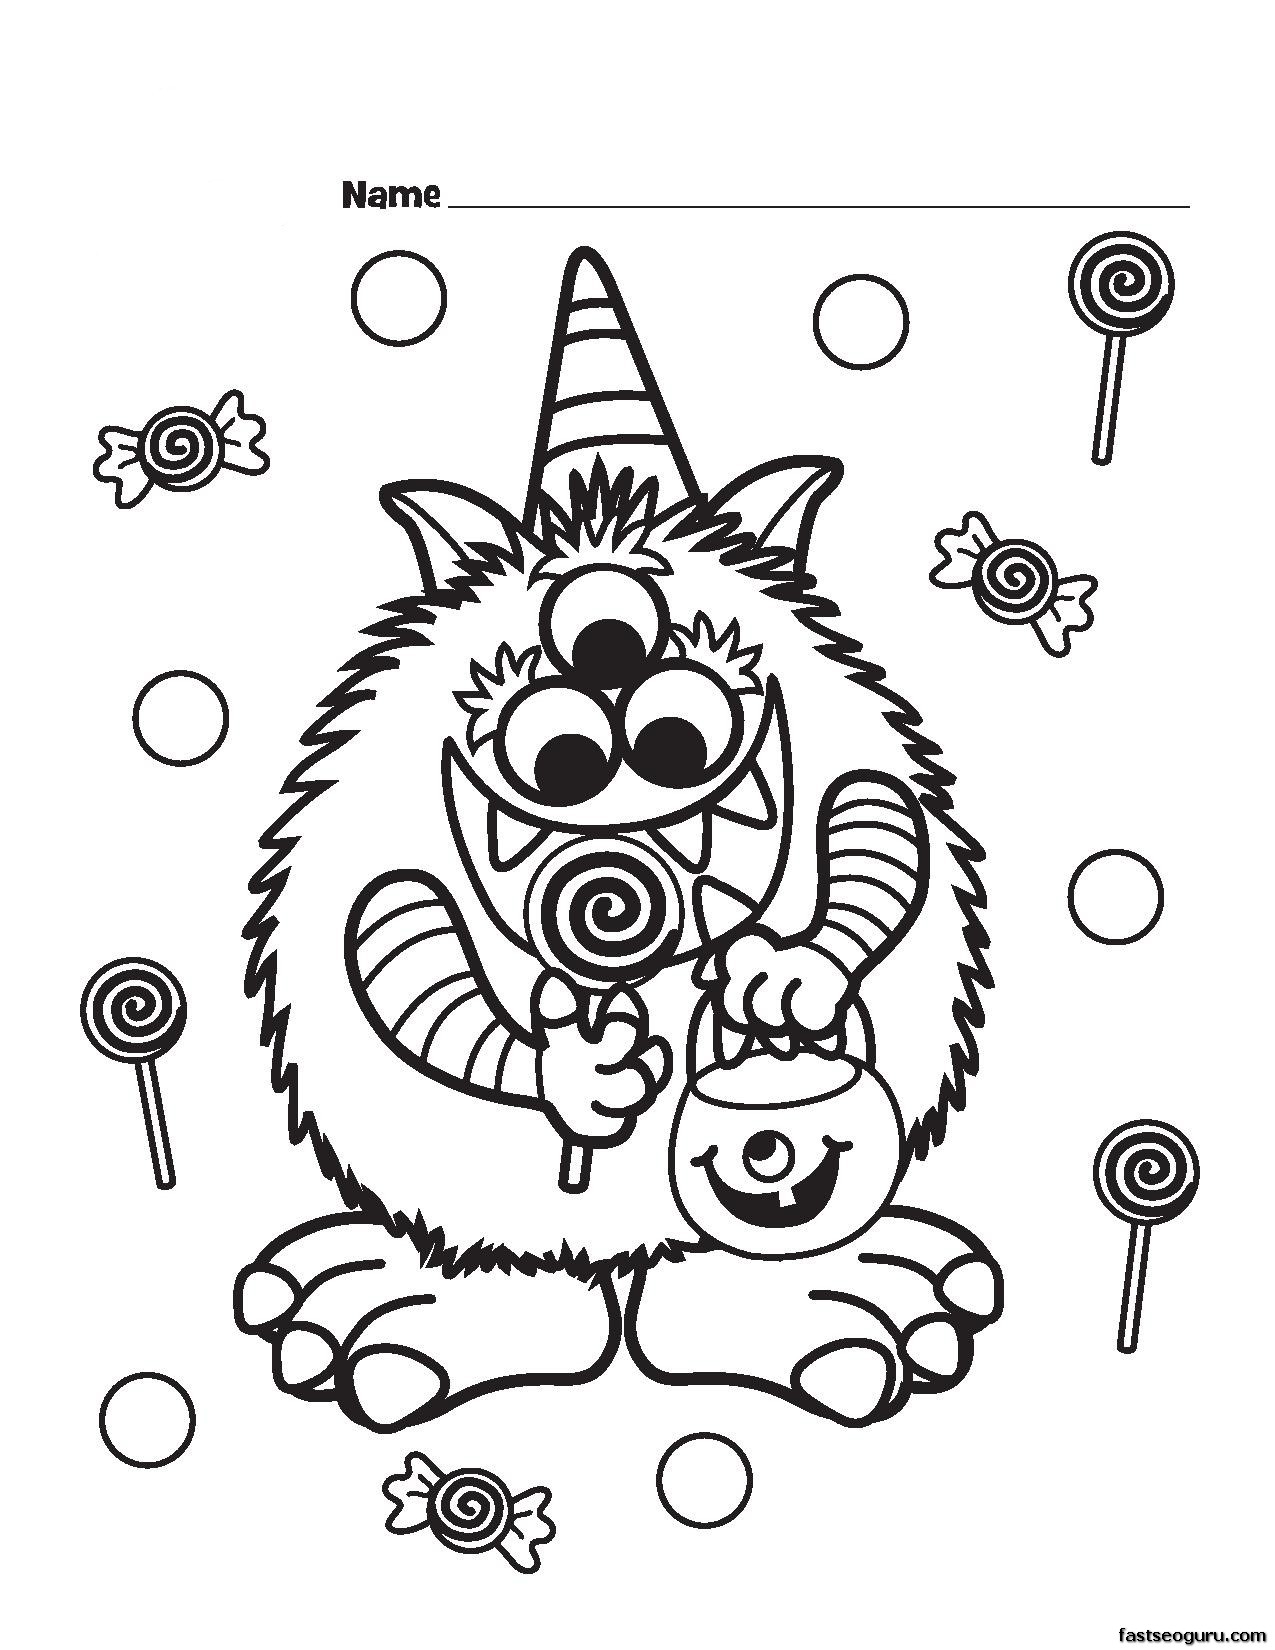 Halloween Candy Critter printabel Coloring Page